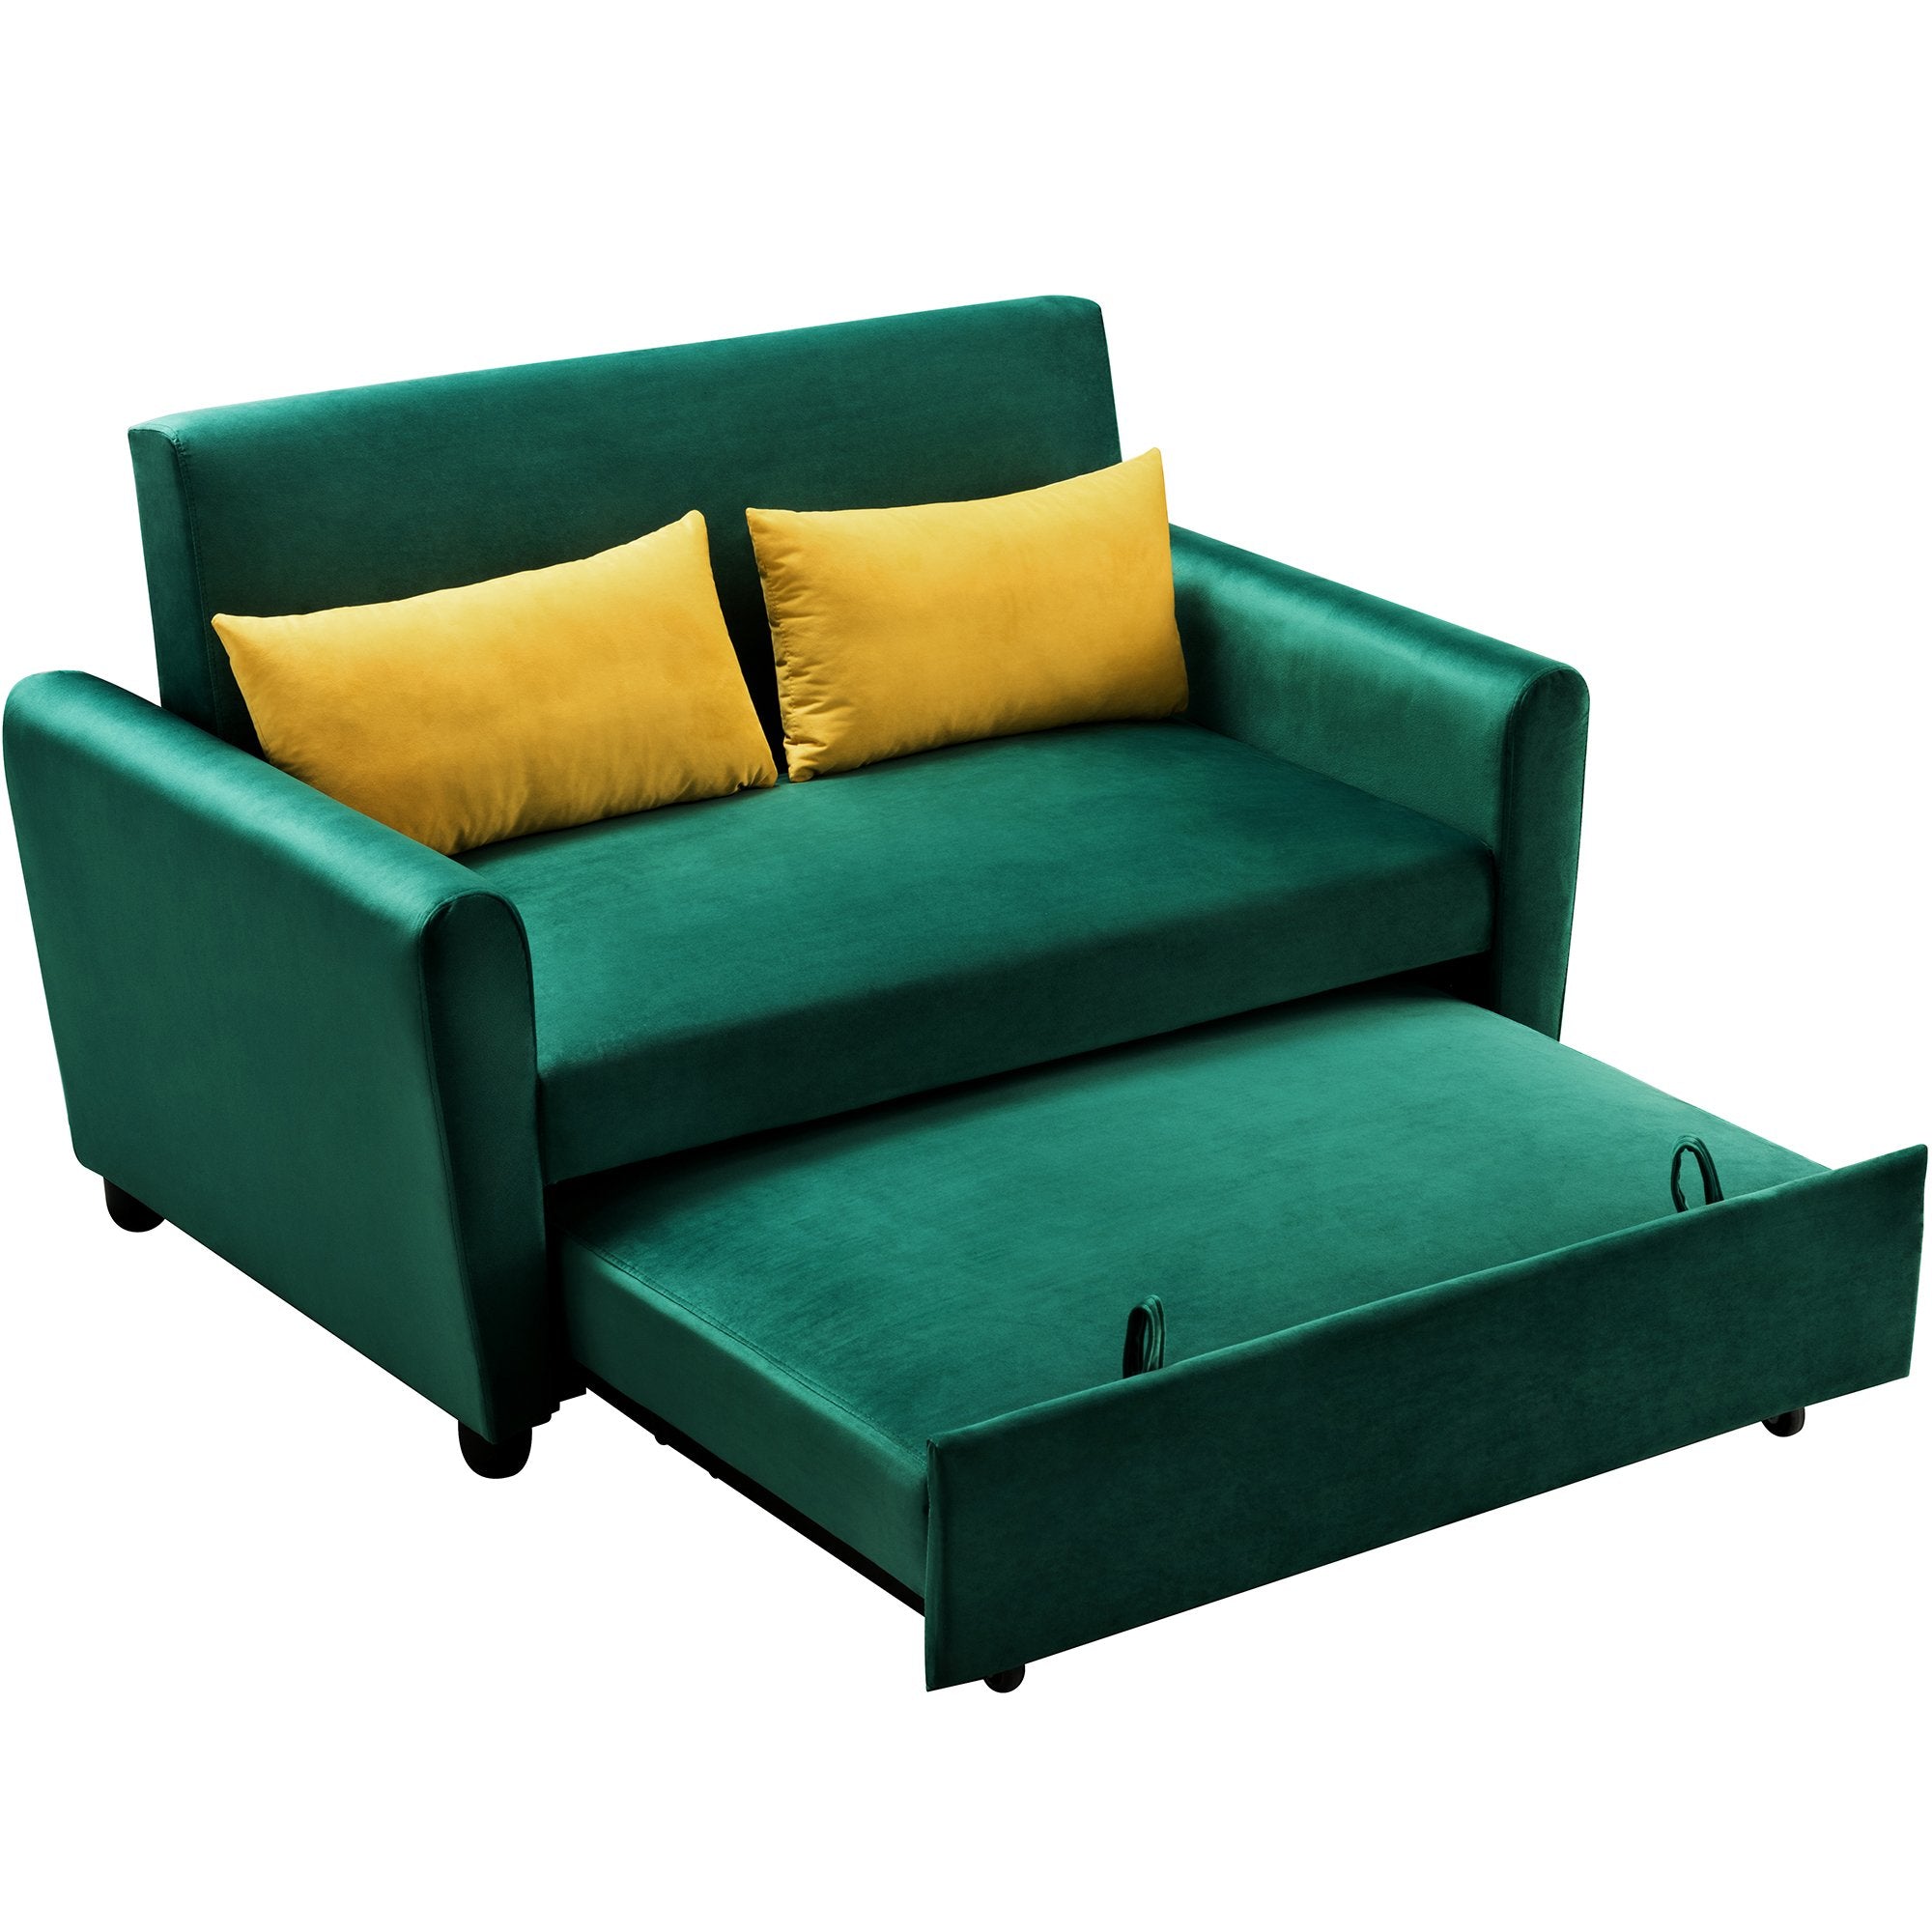 55" Modern Velvet Sofa with Pull-Out Sleeper Bed with 2 Pillows Adjustable Backrest for Small Spaces-Boyel Living